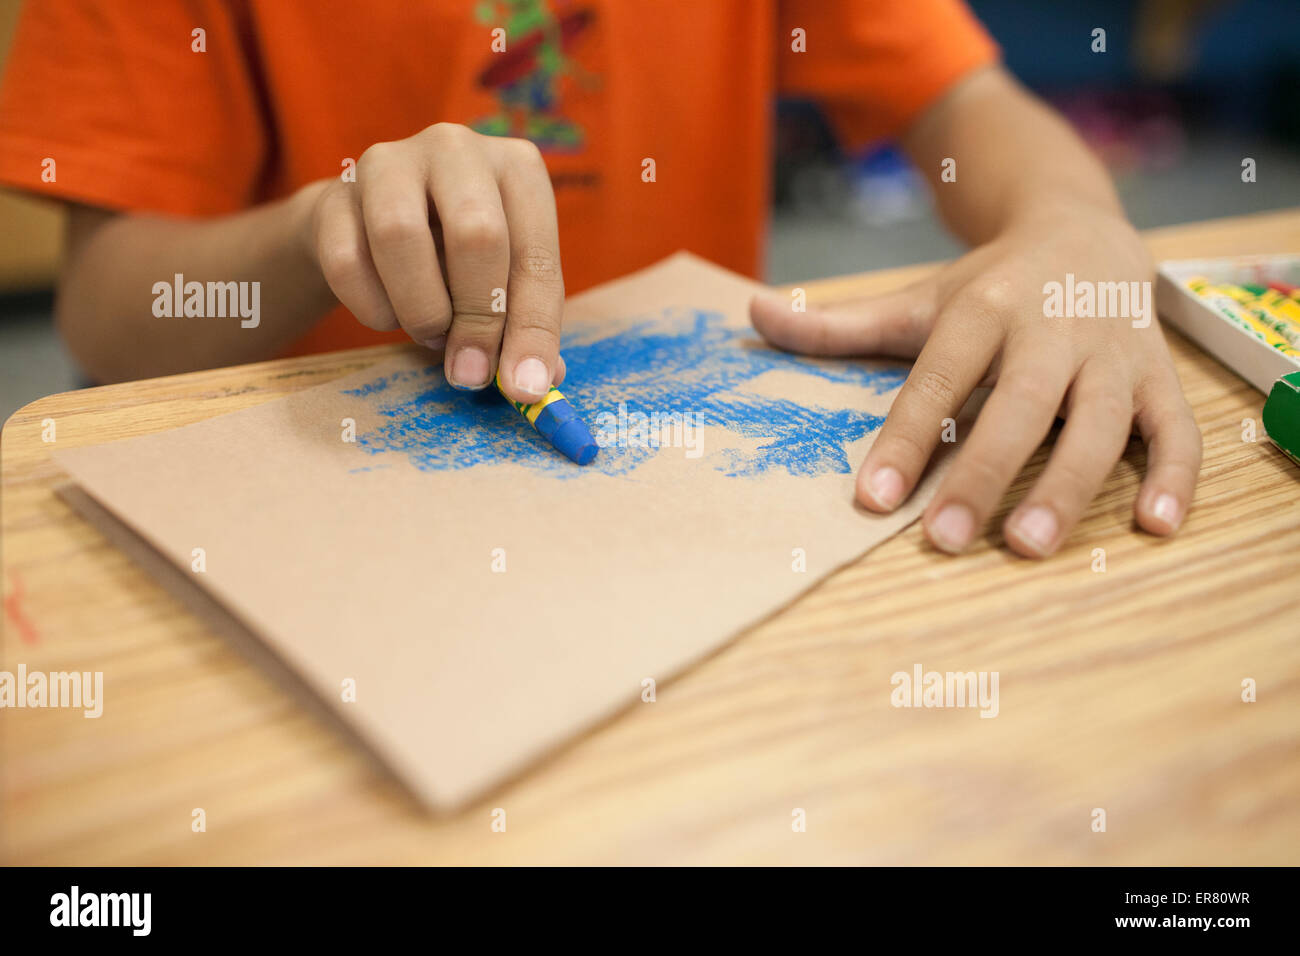 A young boy colors using a blue crayon. Stock Photo